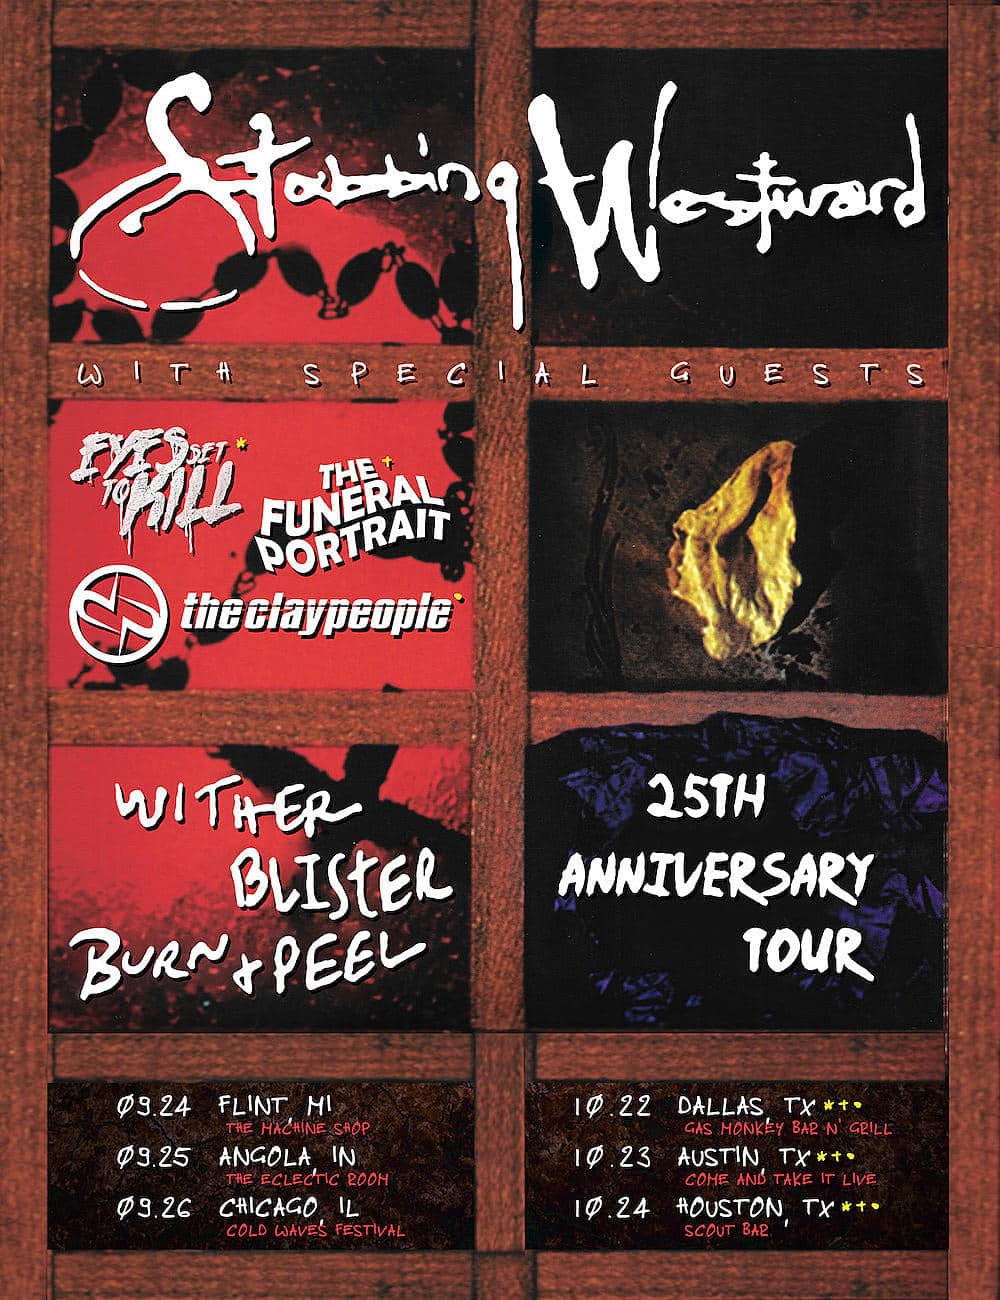 stabbing westward concert dates 2021, STABBING WESTWARD Plan Stretch Of Shows For 25th Anniversary Of Sophomore Album